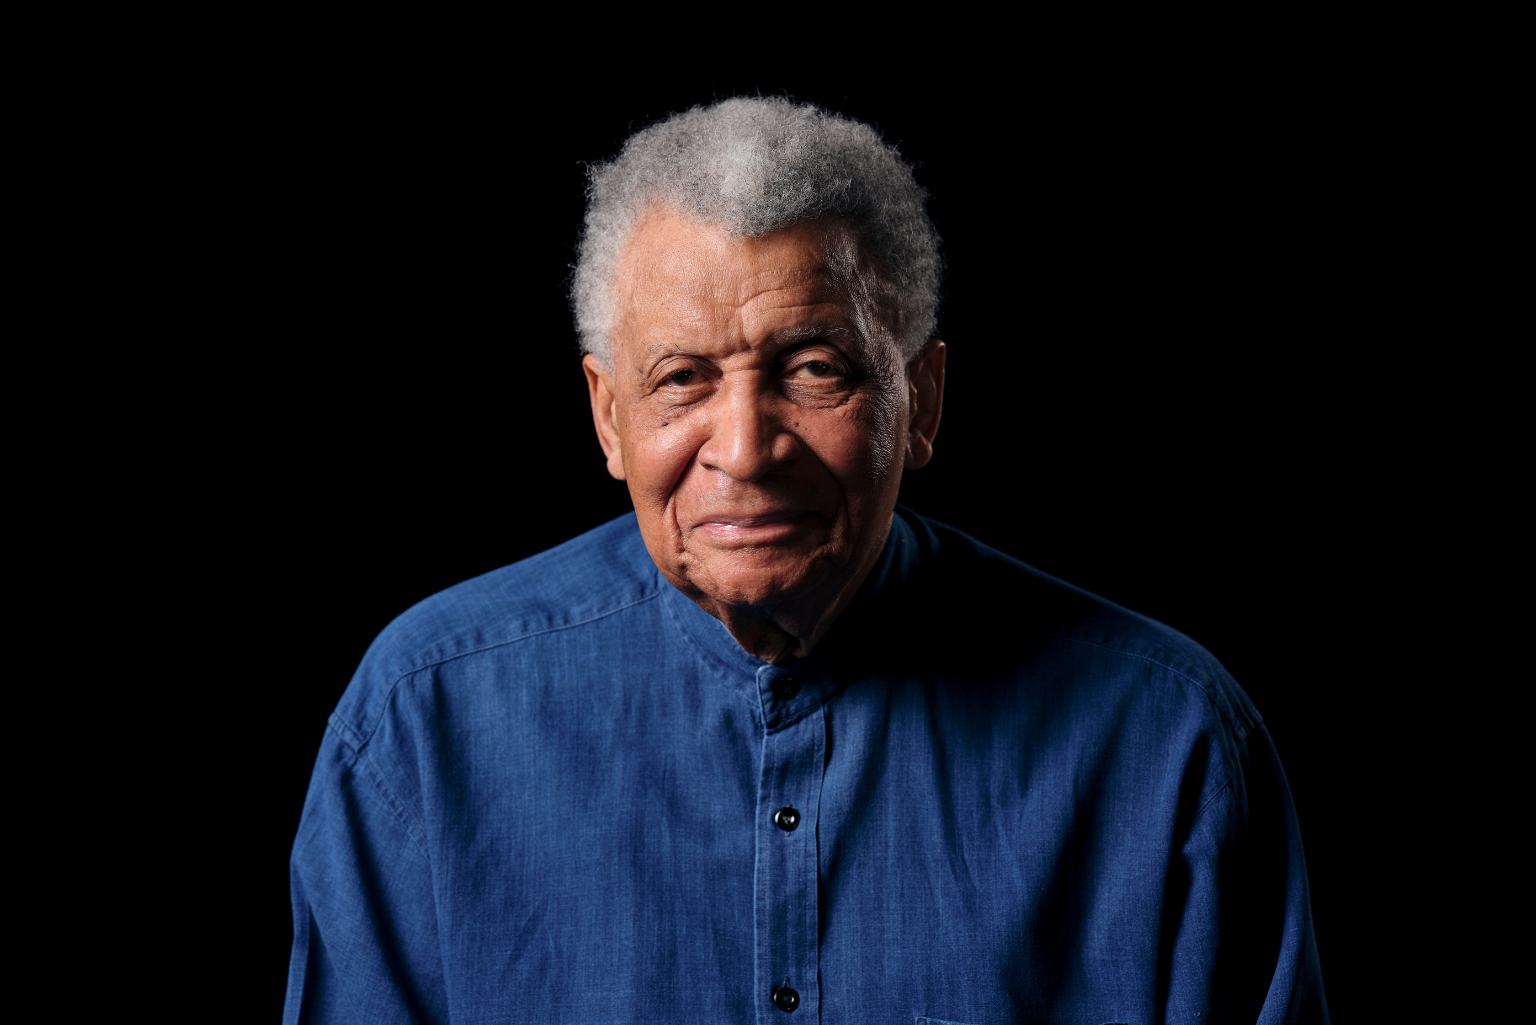 Abdullah Ibrahim sits with a black background and faces the camera.